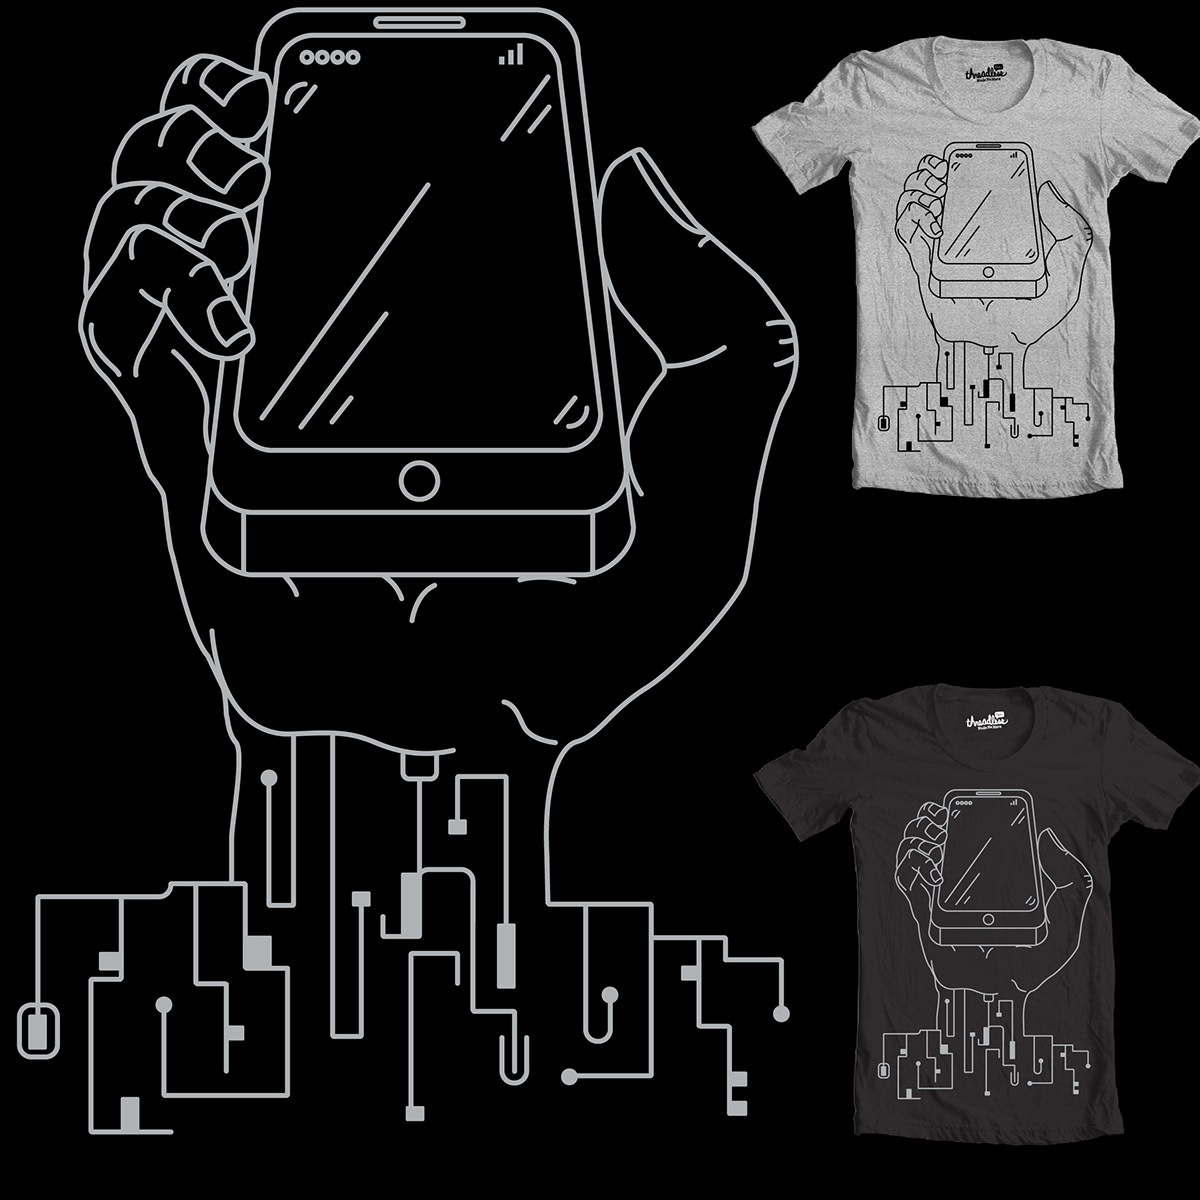 lance lionetti Threadless tee shirts Sherlock Hipster bull negative space Sci Fi fact or fiction Minimalism iphone connected network